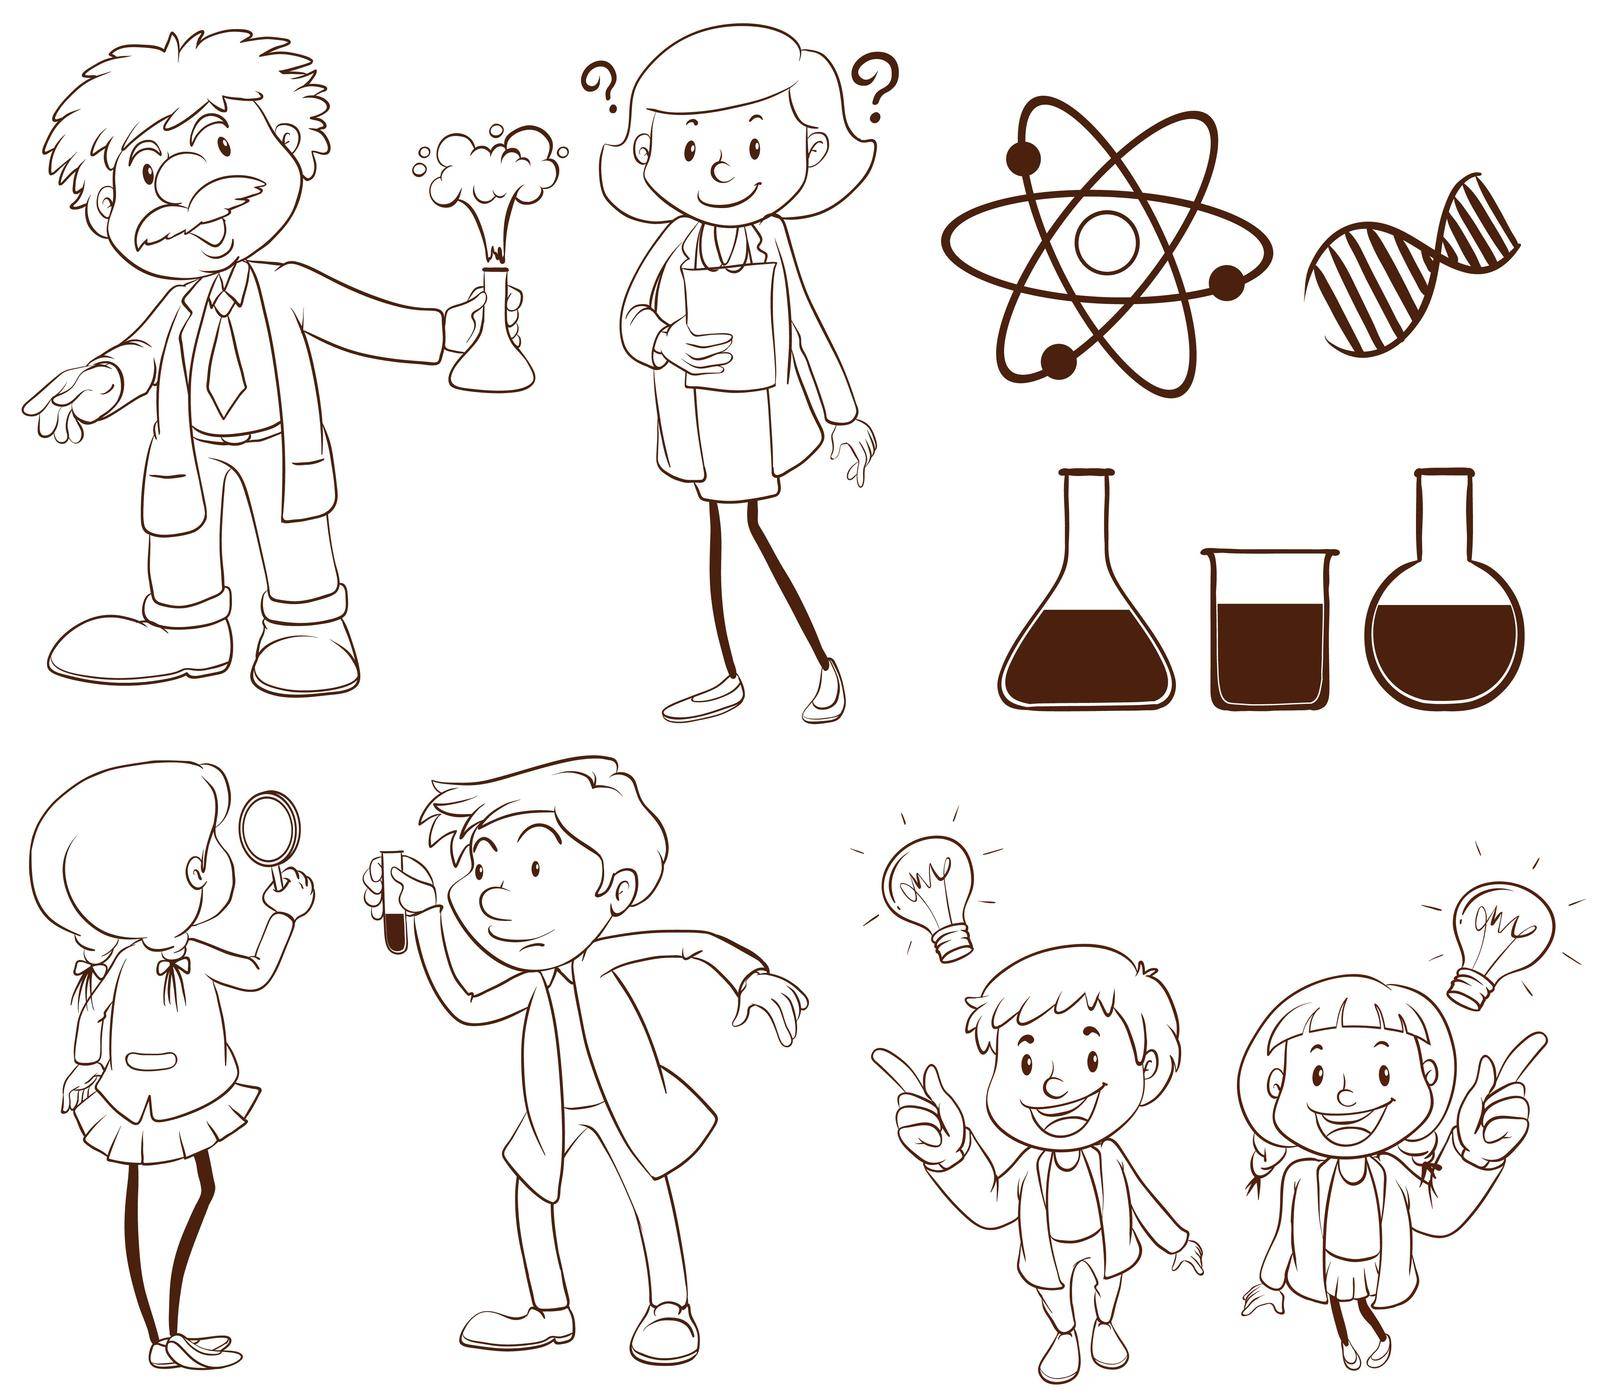 Illustration of scientists and labs